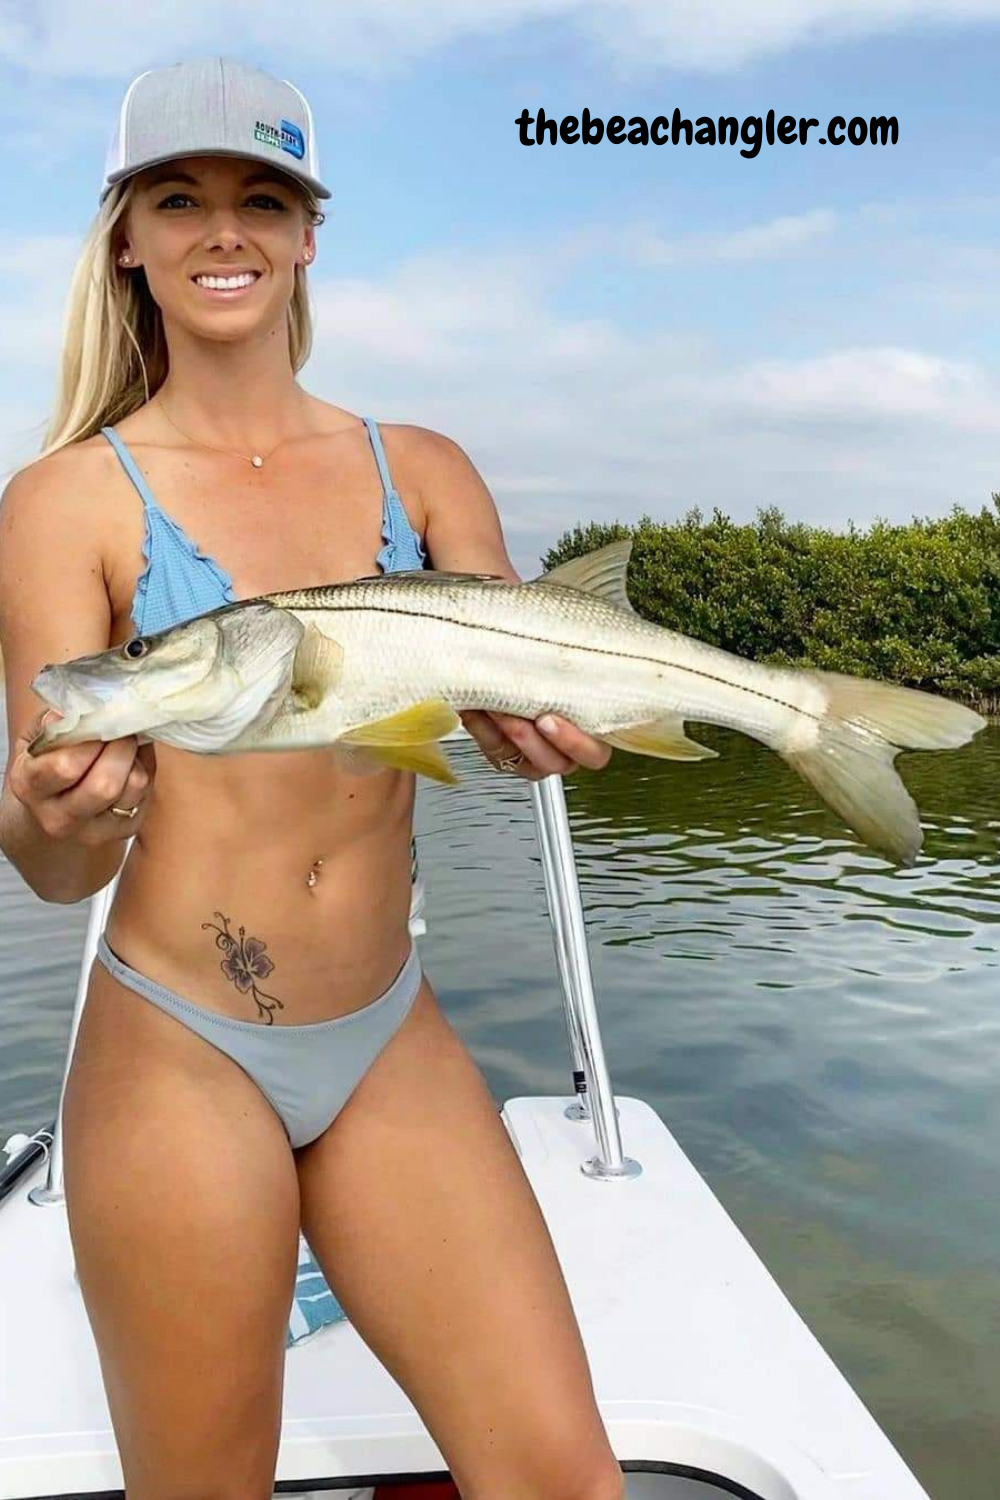 Lady with a nice snook getting all her tackle there with a surf fishing tacle bag